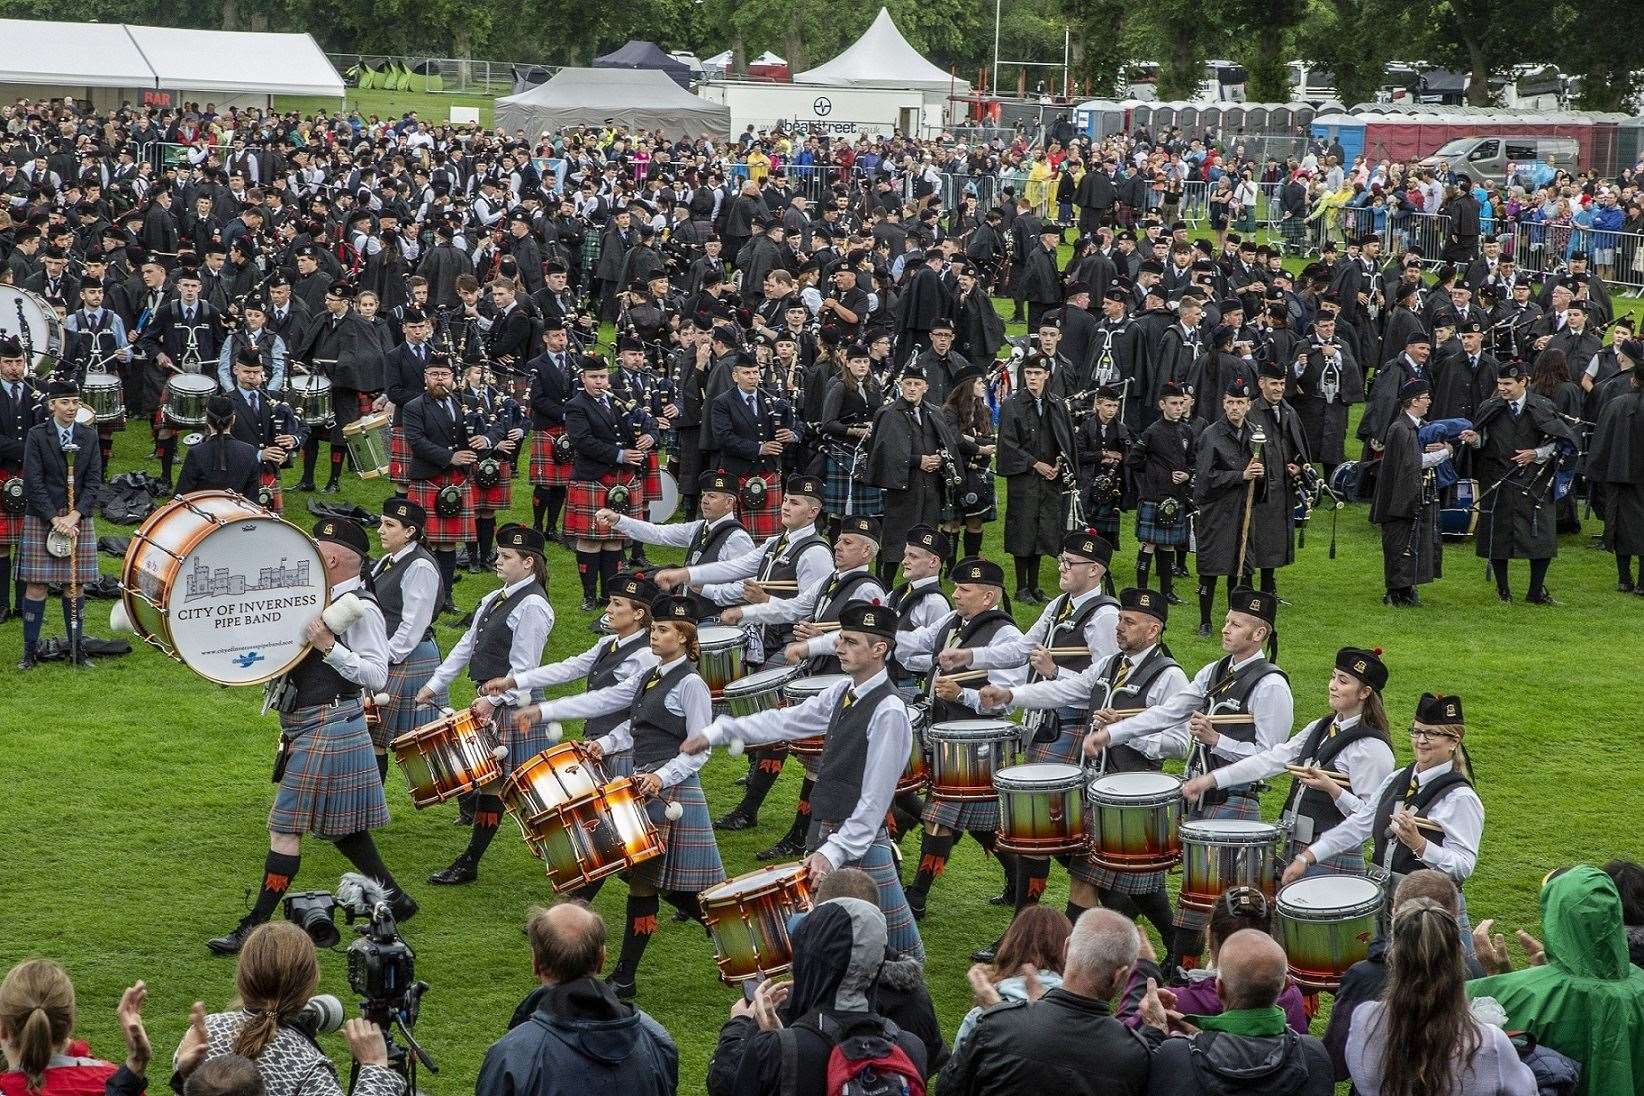 Pipe Bands will return to Bught Park in June for Piping Inverness.